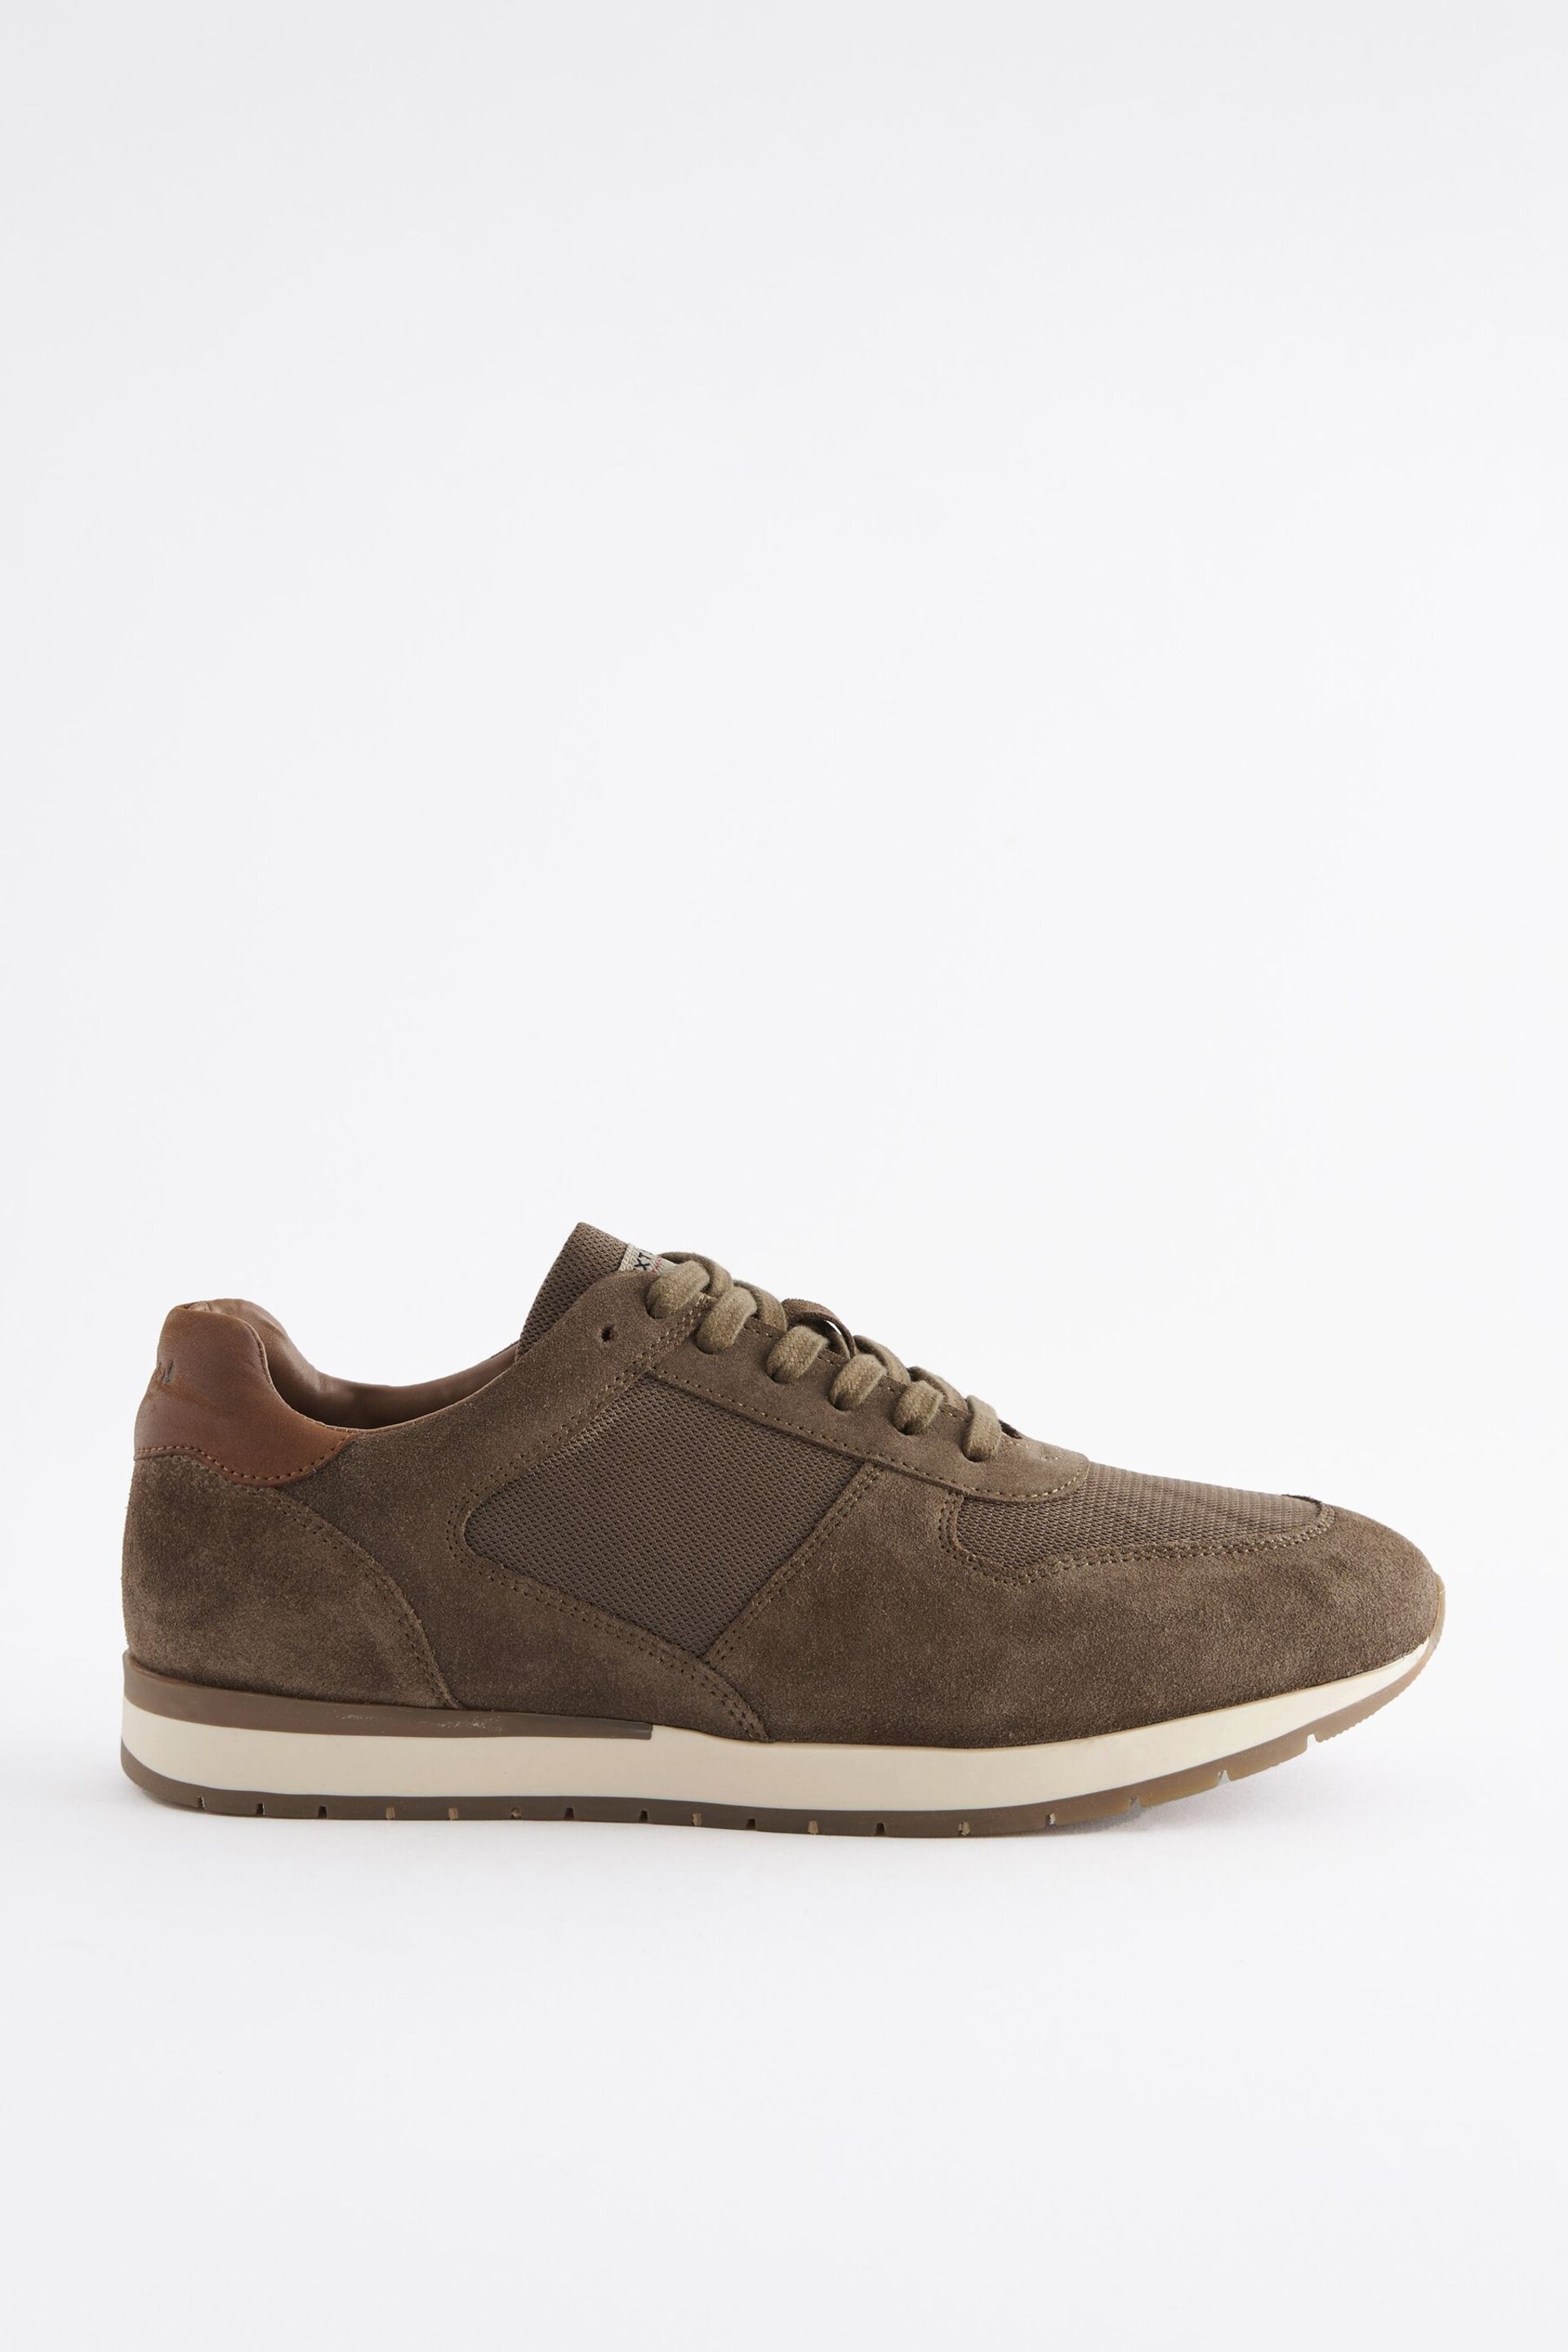 Taupe Brown Suede Trainers - Image 2 of 6